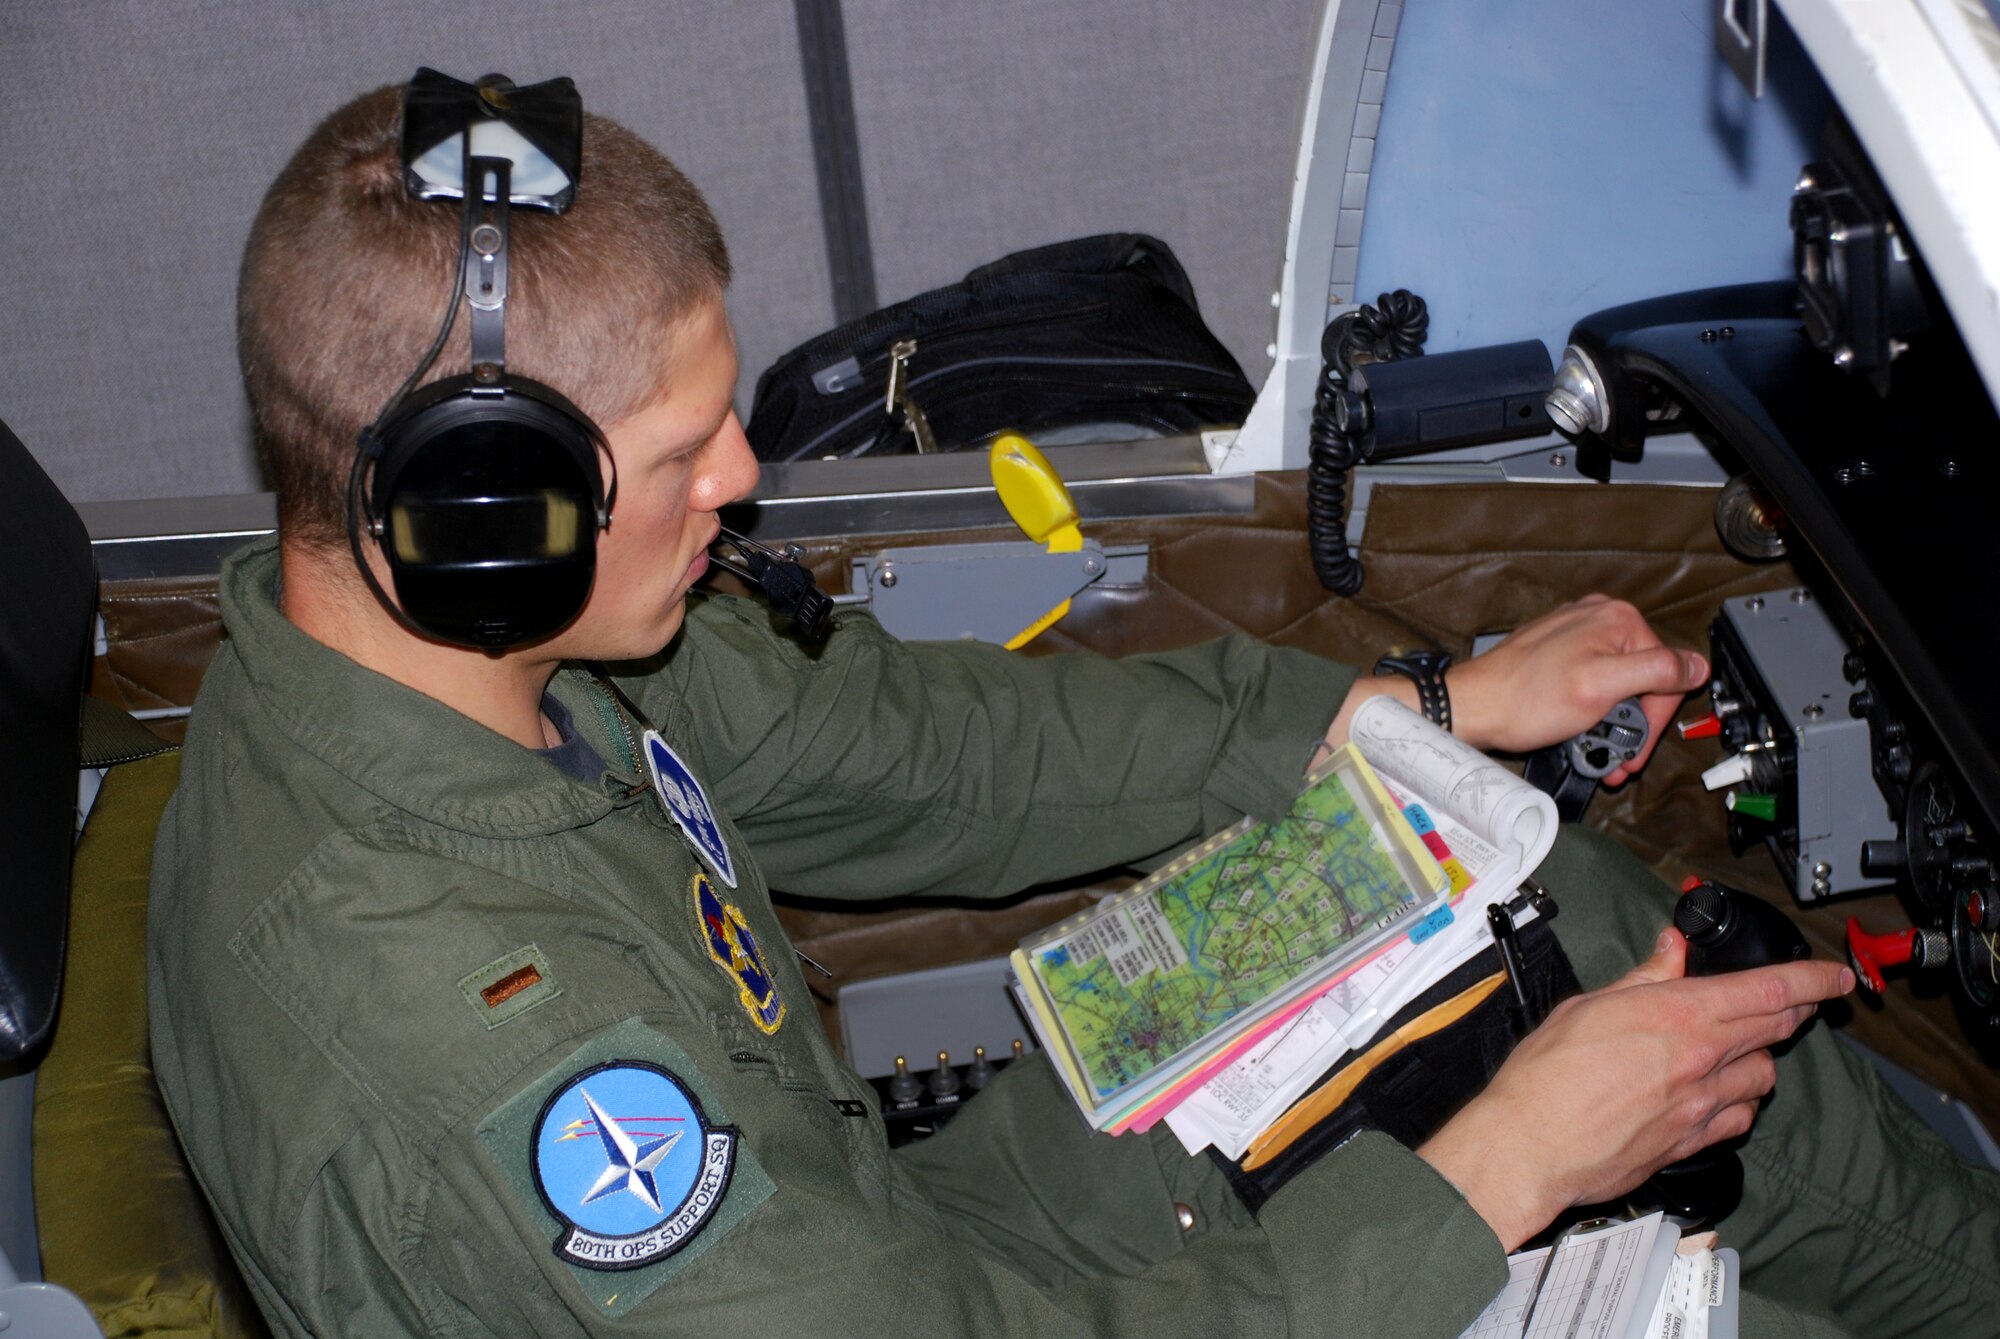 Second Lt. Evan Negron, a T-37 Tweet student pilot at the Euro-NATO Joint Jet Pilot Training Program, conducts the last simulation by a student pilot in the Air Force April 23. The T-6A Texan II will replace the Tweet this summer when the more than 50-year-old introductory trainer retires. (U.S. Air Force photo/John Ingle)